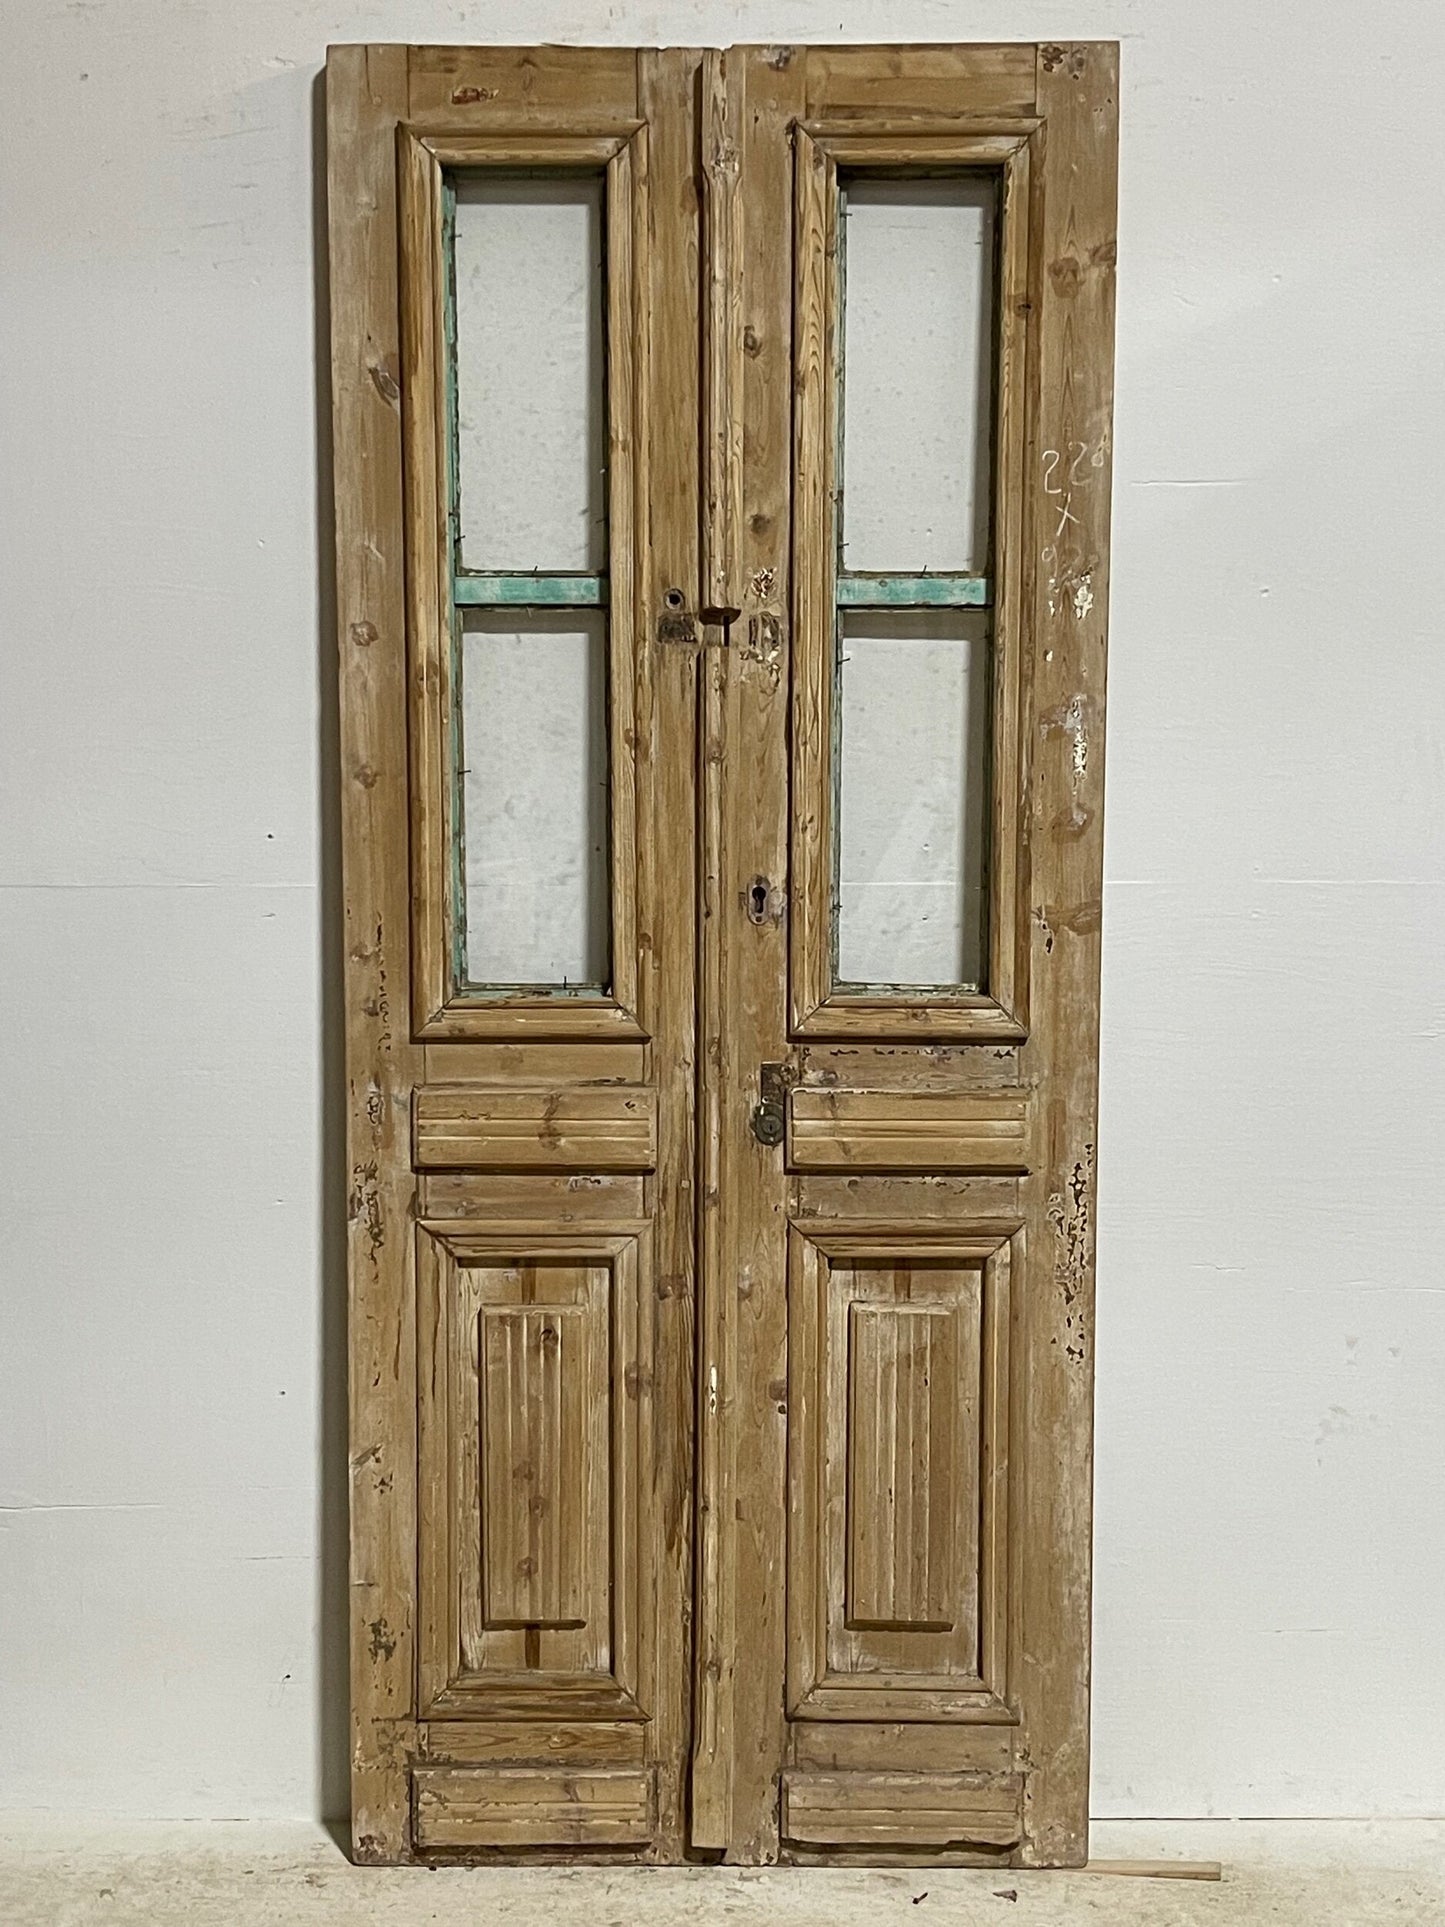 Antique French doors with glass (87x36.75) H0103s